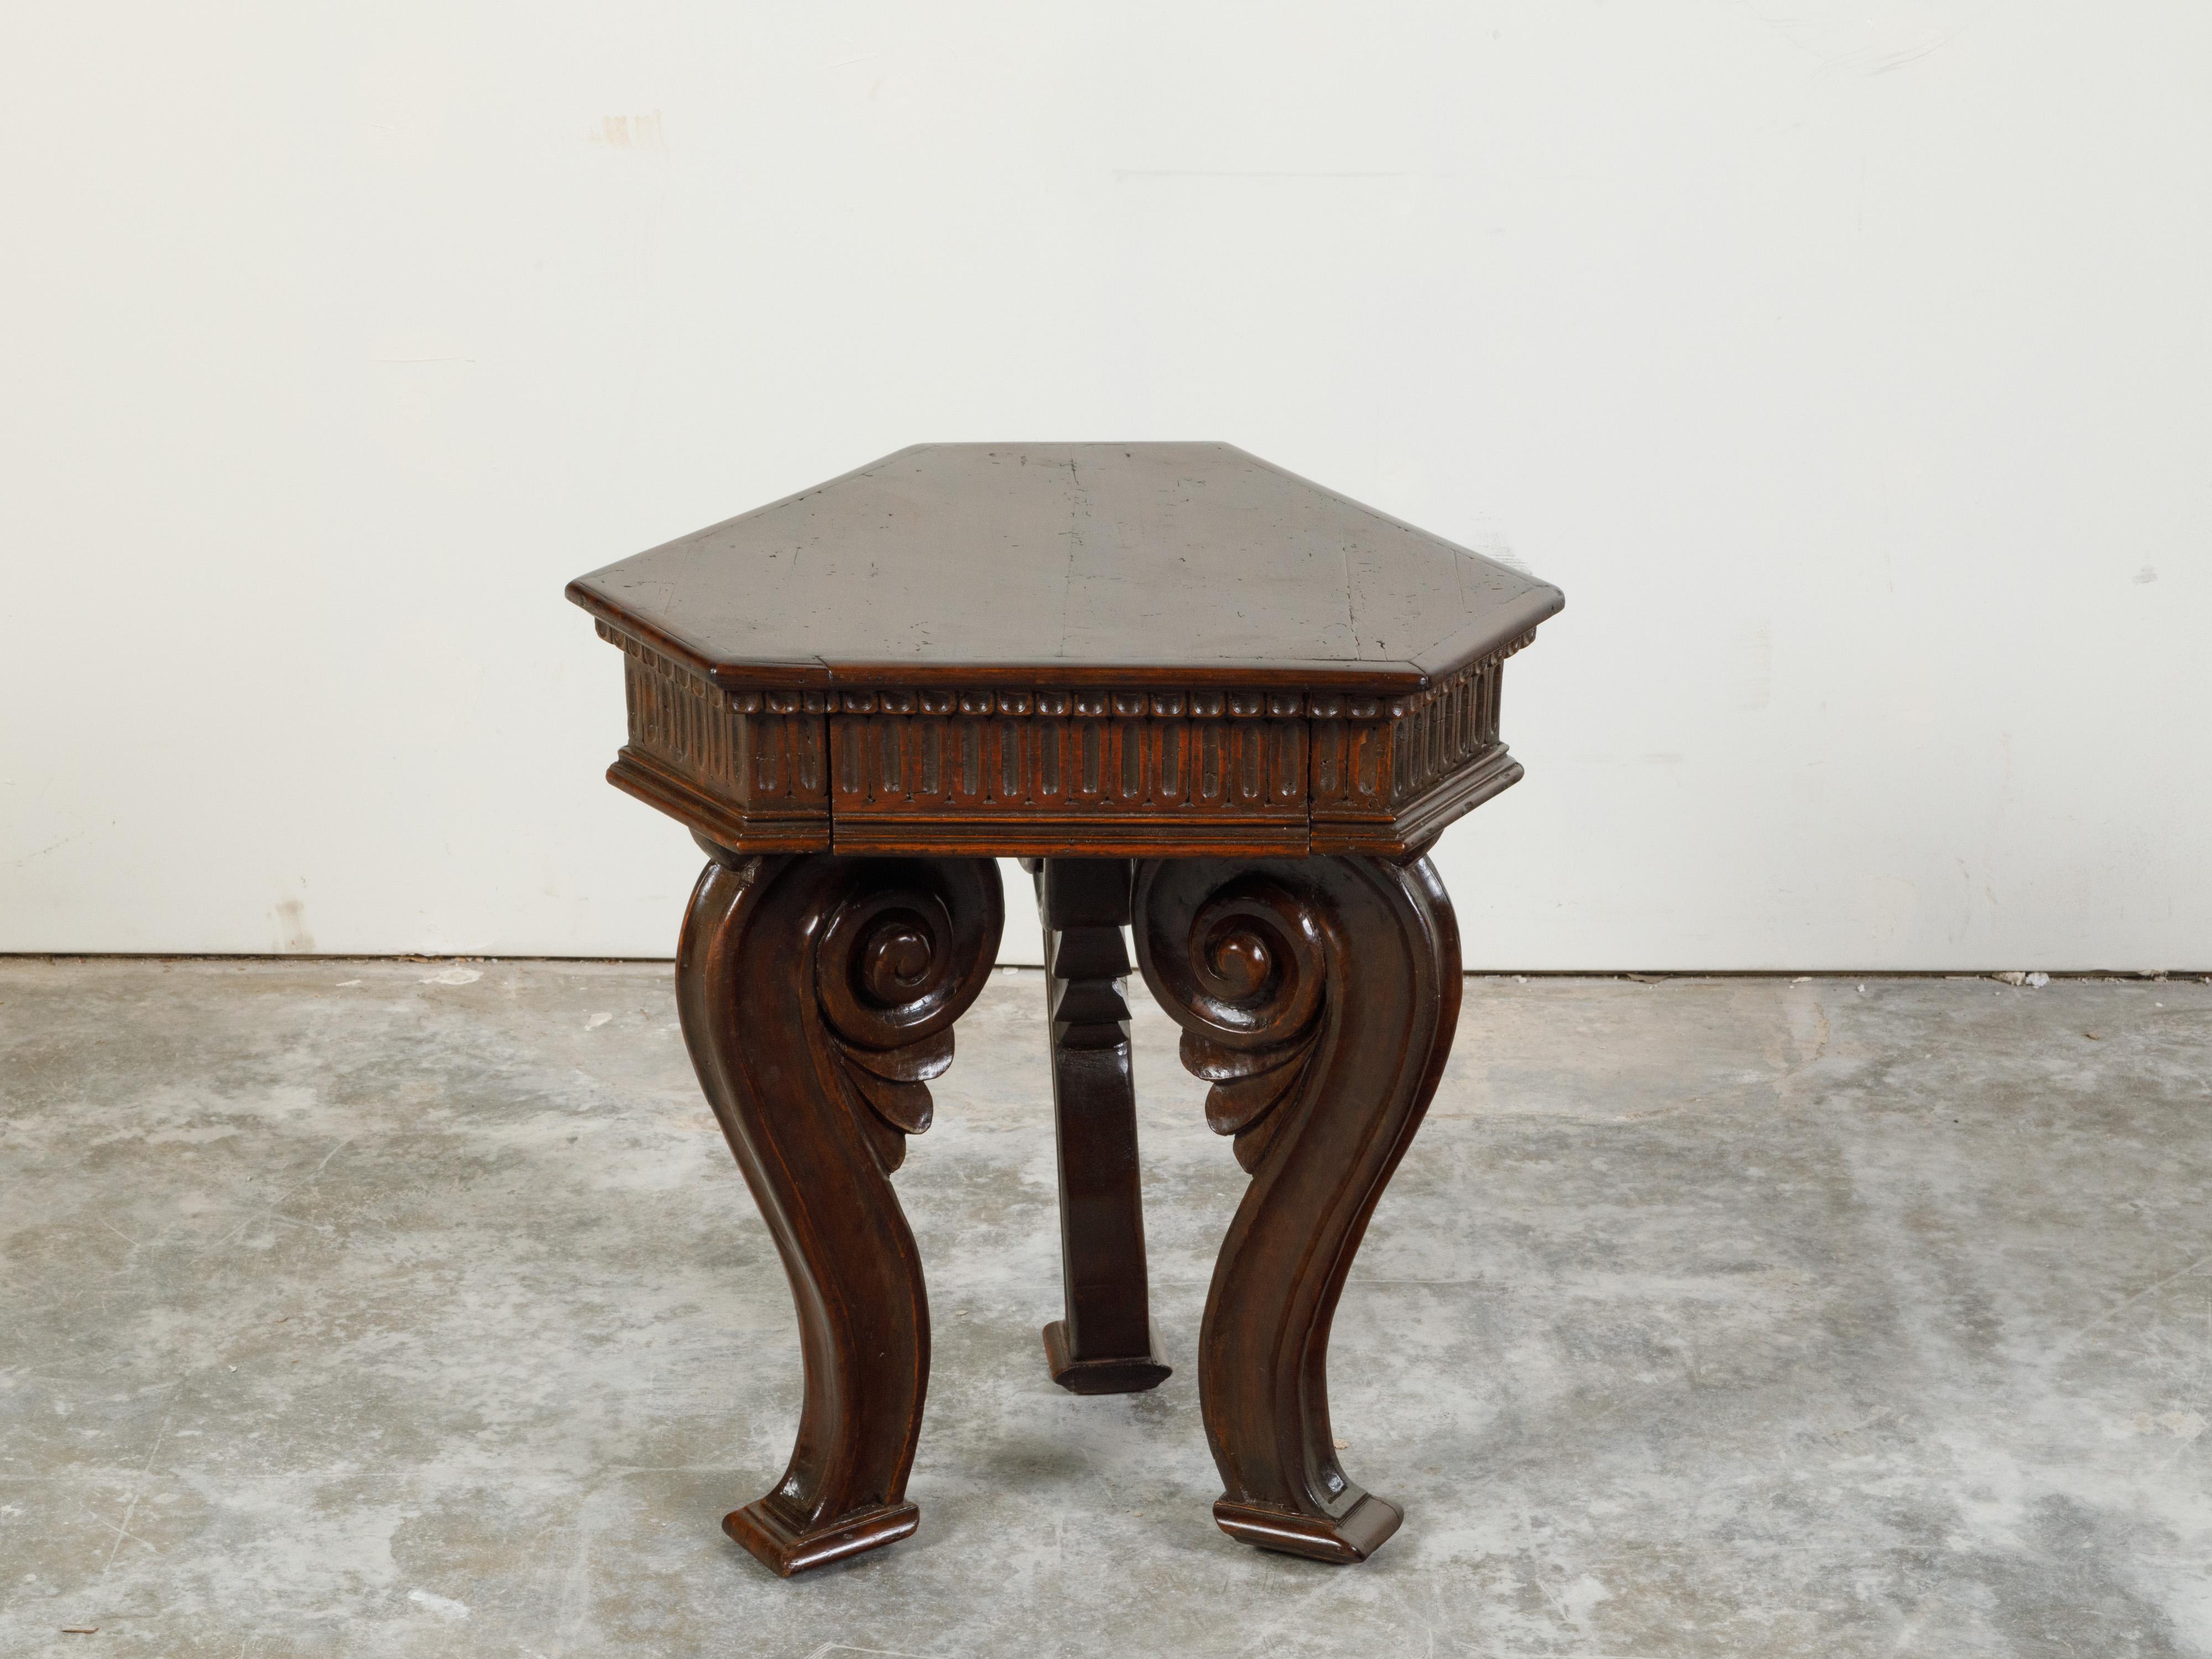 An Italian walnut low side table from the late 18th century, with hexagonal top, carved fluted motifs, single drawer and scrolling legs. Created in Italy during the last years of the 18th century, this walnut side table features an hexagonal top